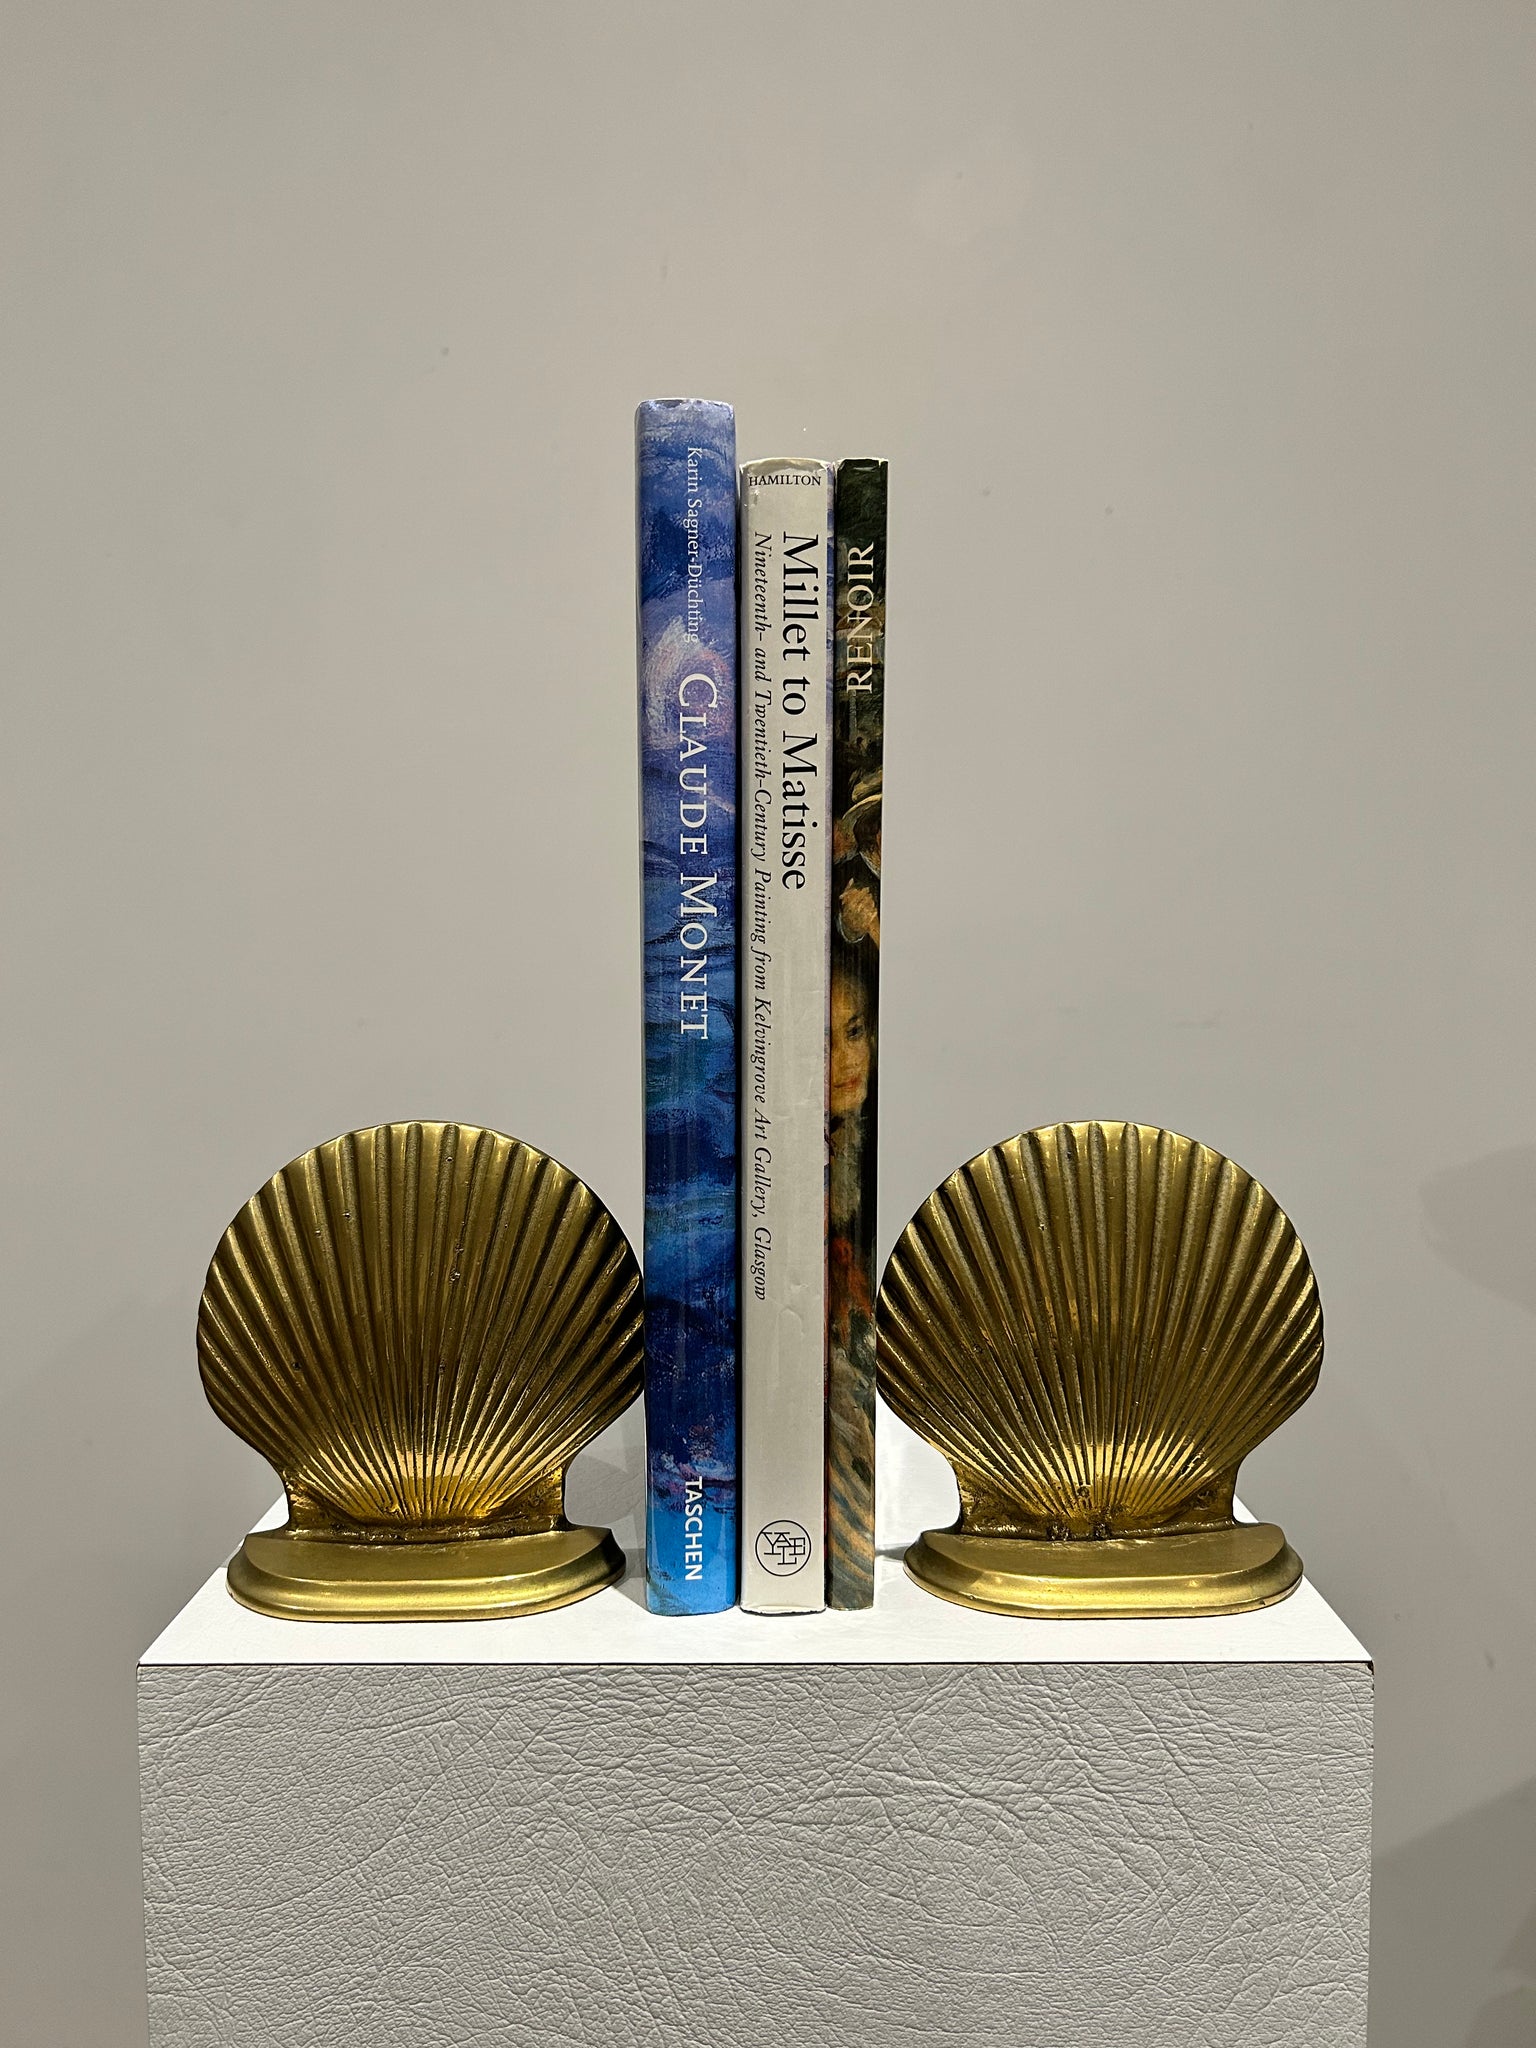 Sold at Auction: Pair of 1970s Brass Seashell Bookends